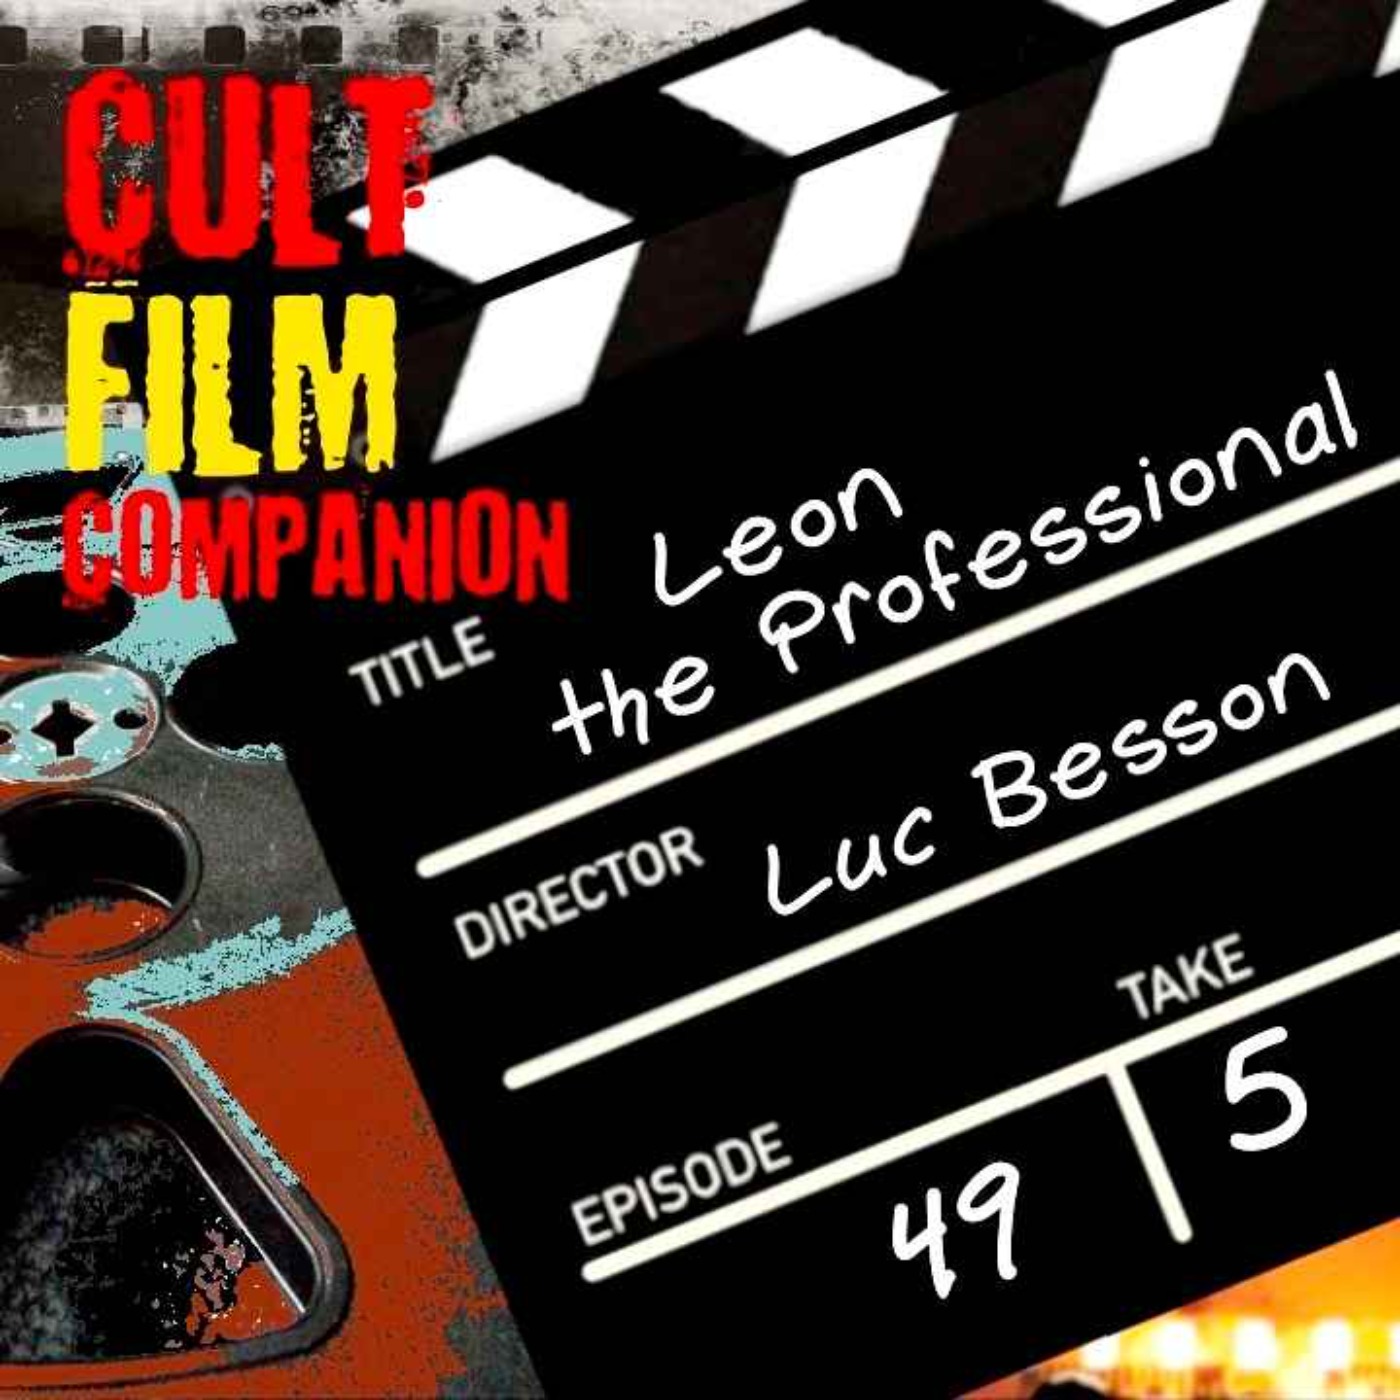 Ep. 49 Leon the Professional directed by Luc Besson